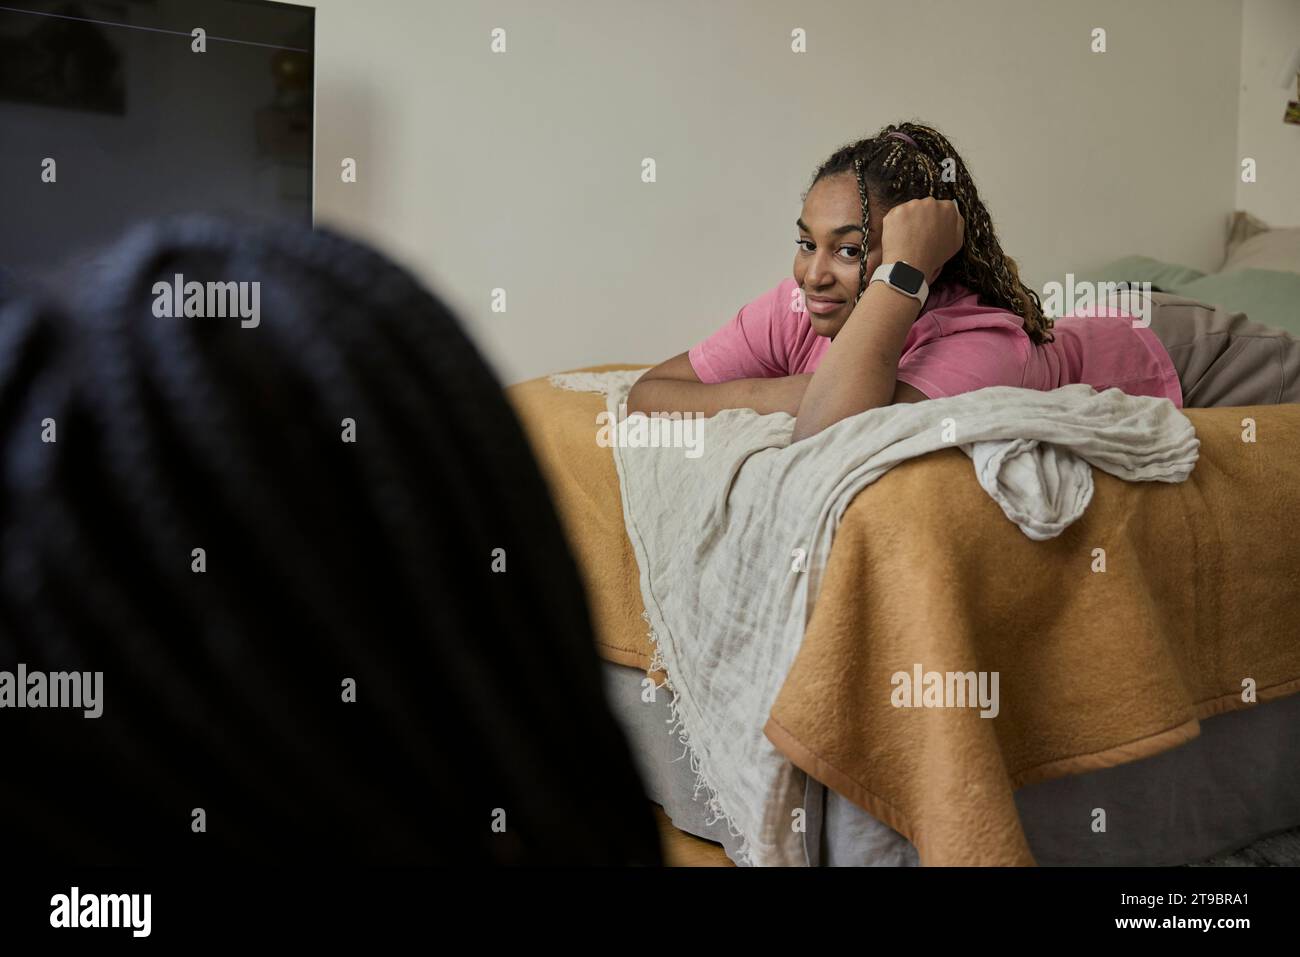 Teenage girl with head in hand lying on bed and looking at her friend Stock Photo